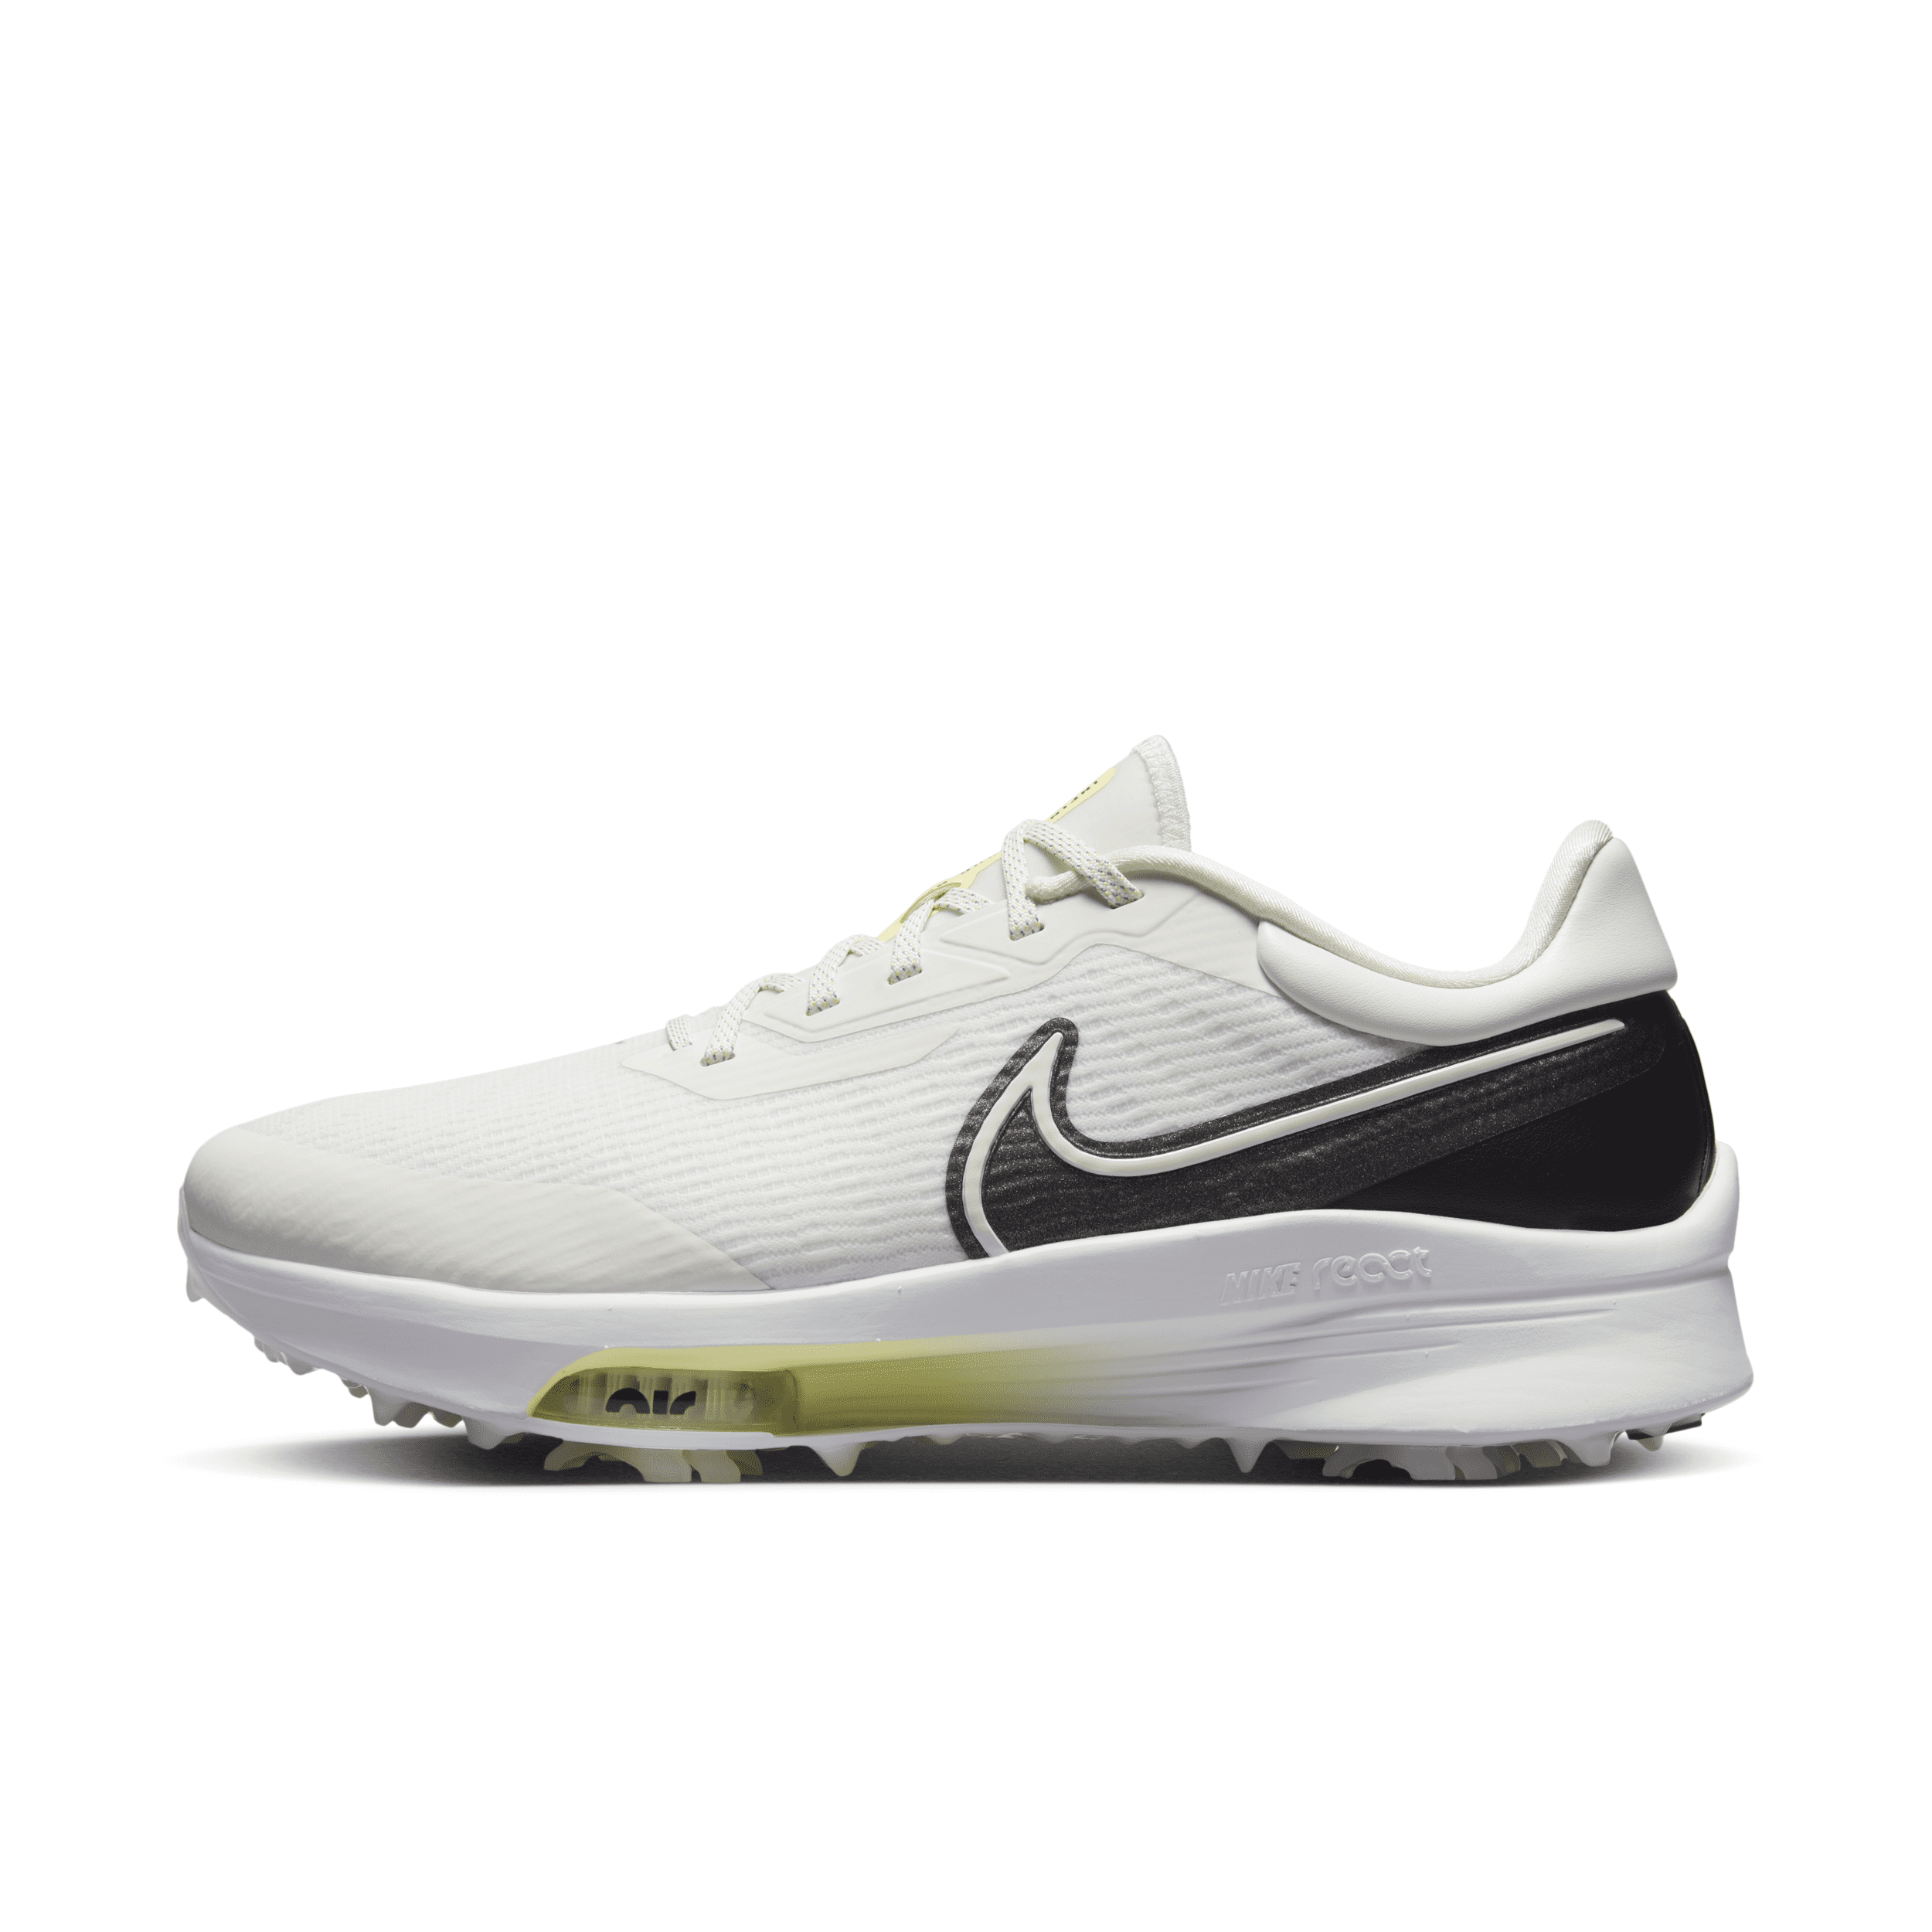 NIKE MEN'S AIR ZOOM INFINITY TOUR GOLF SHOES,1003334594